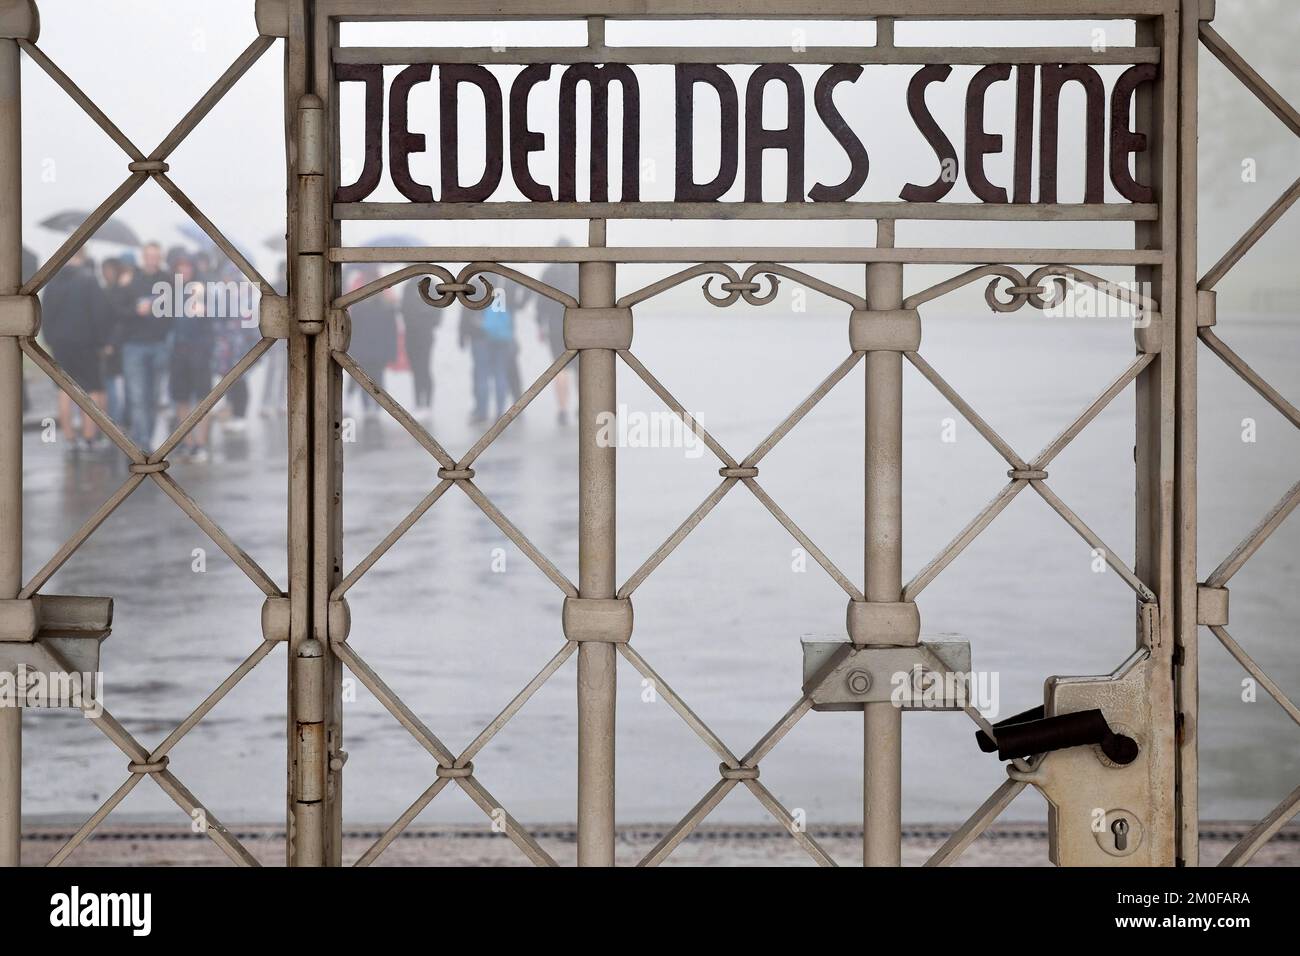 entrance gate in the Nazi concentration camp with the saying 'Jedem das Seine', Germany, Thueringen, Weimar Stock Photo